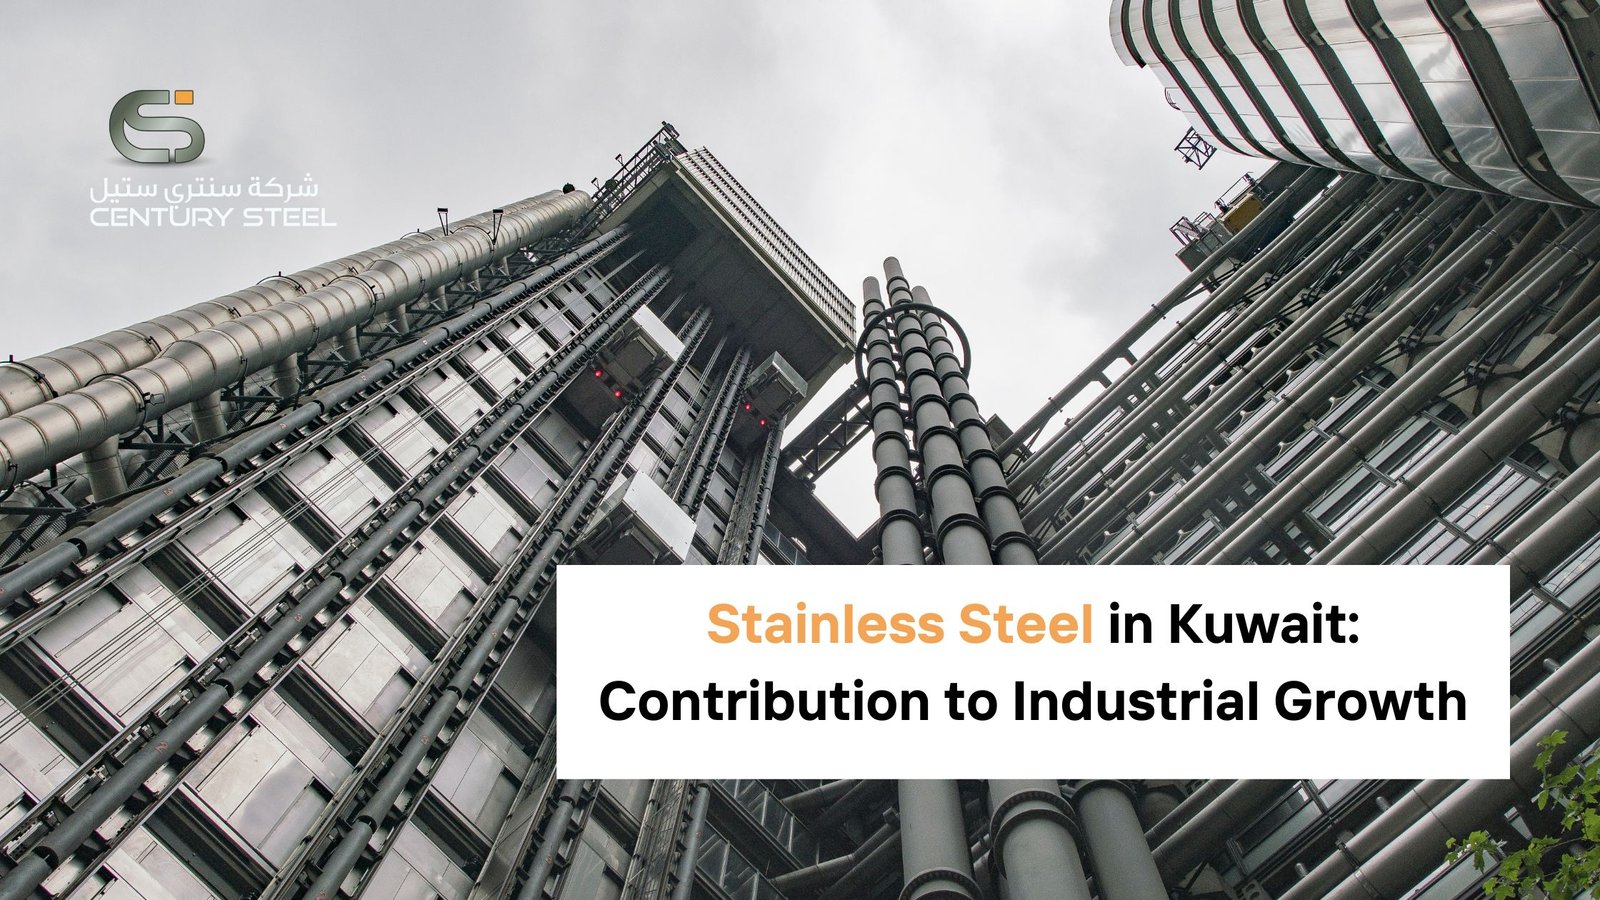 Stainless Steel in Kuwait: Century Steel's Contribution to Industrial Growth